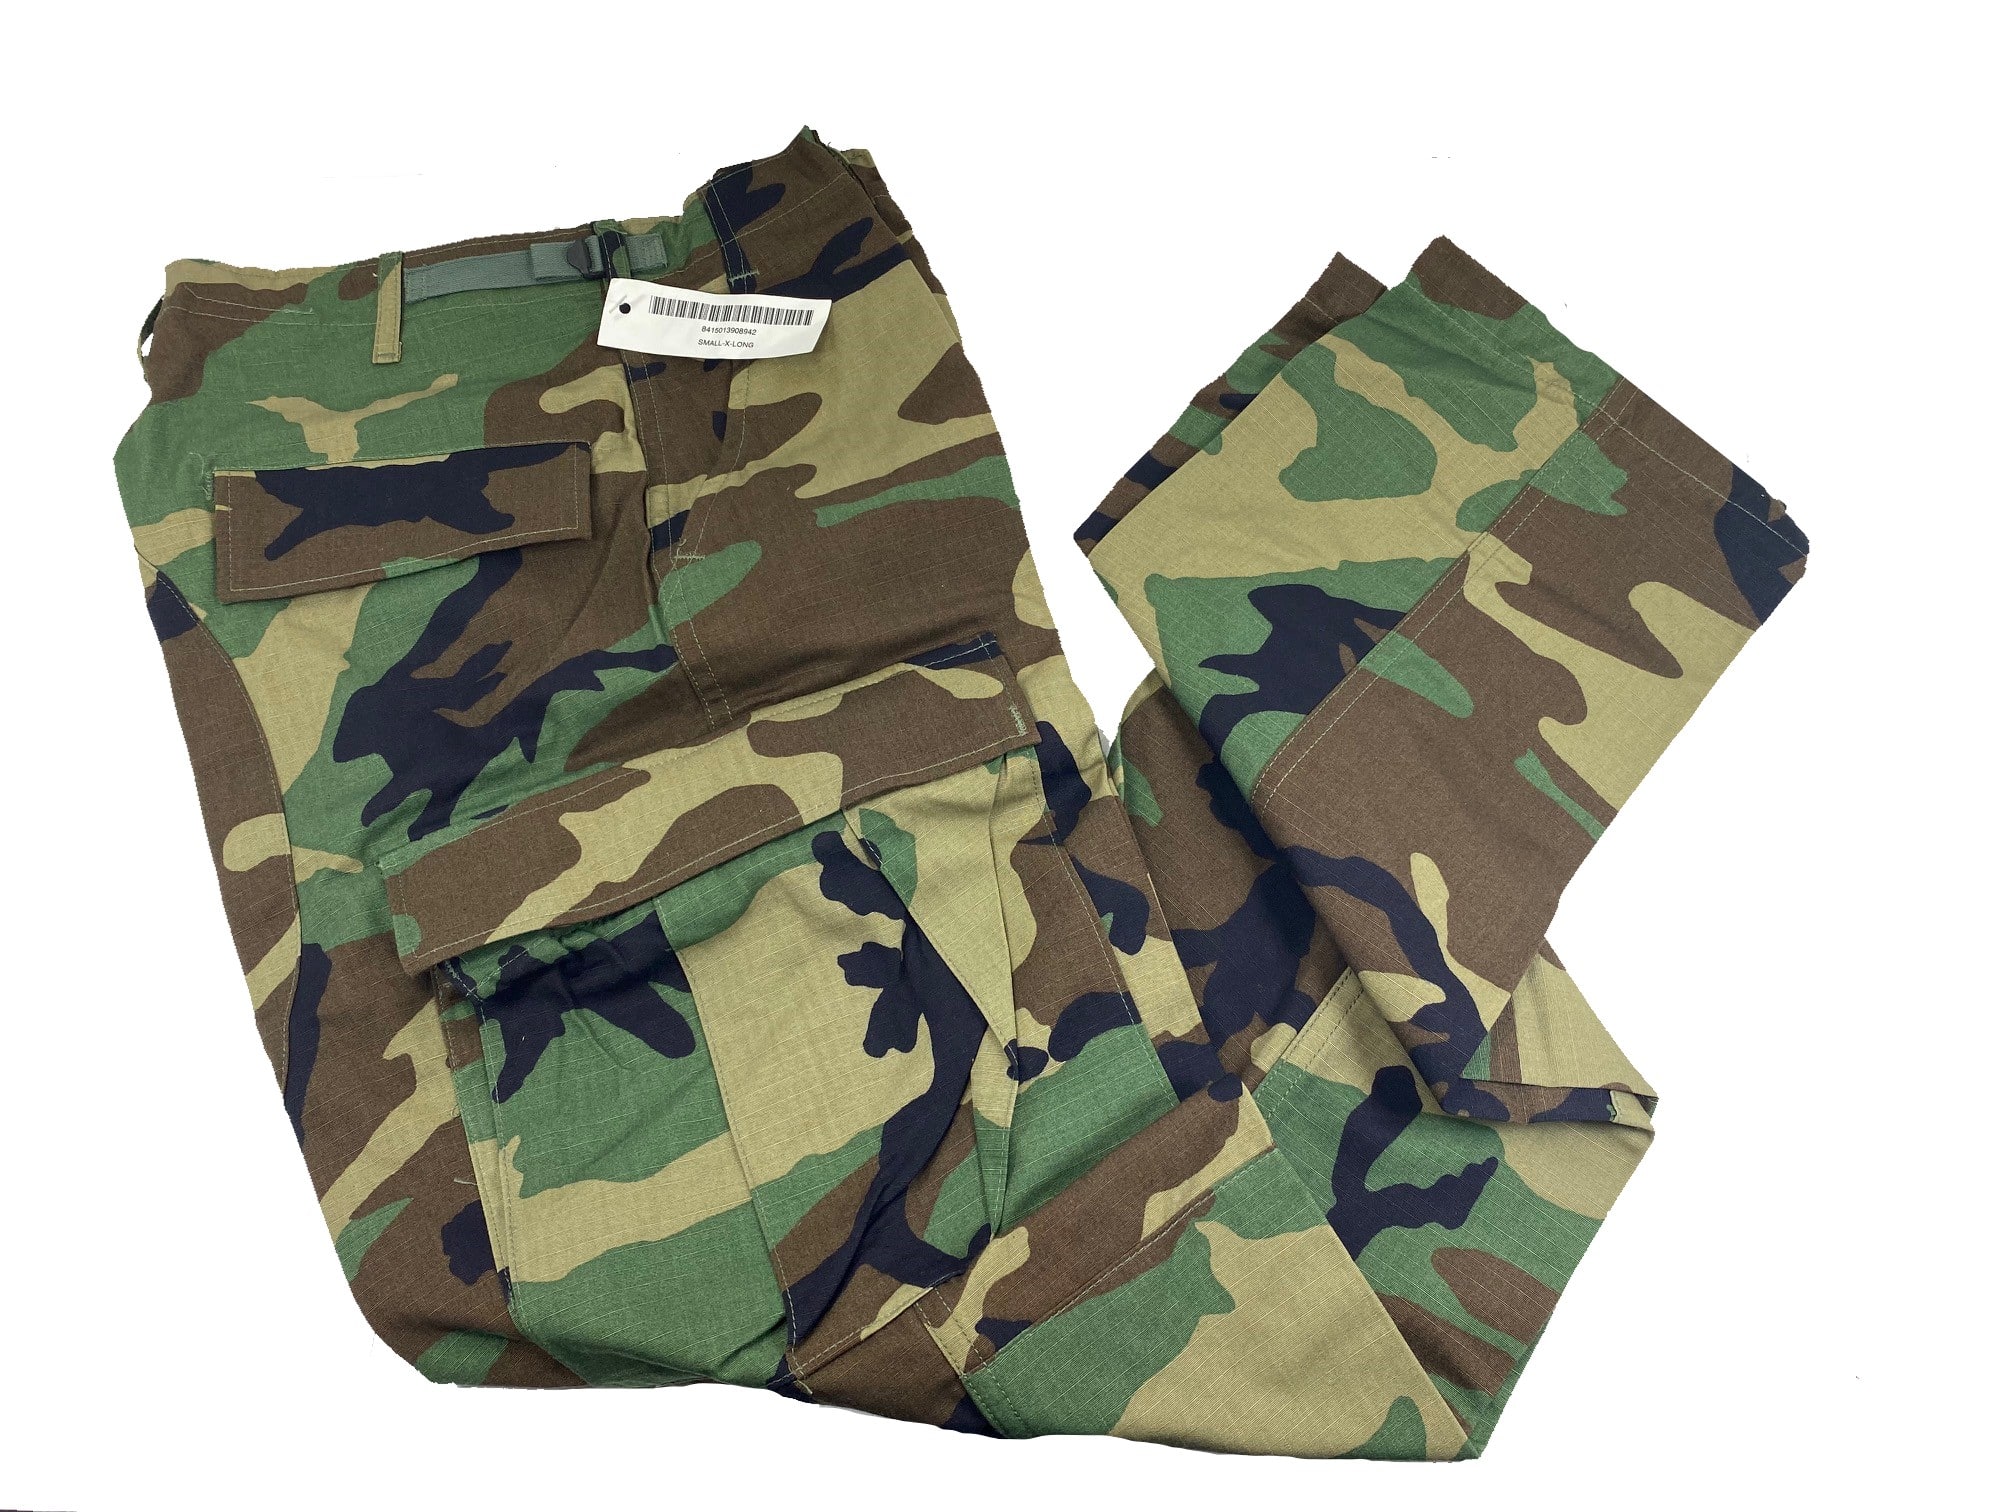 HQ ISSUE U.S. Military Style Ripstop BDU Pants, Olive Drab - 727504,  Tactical Pants & Shorts at Sportsman's Guide